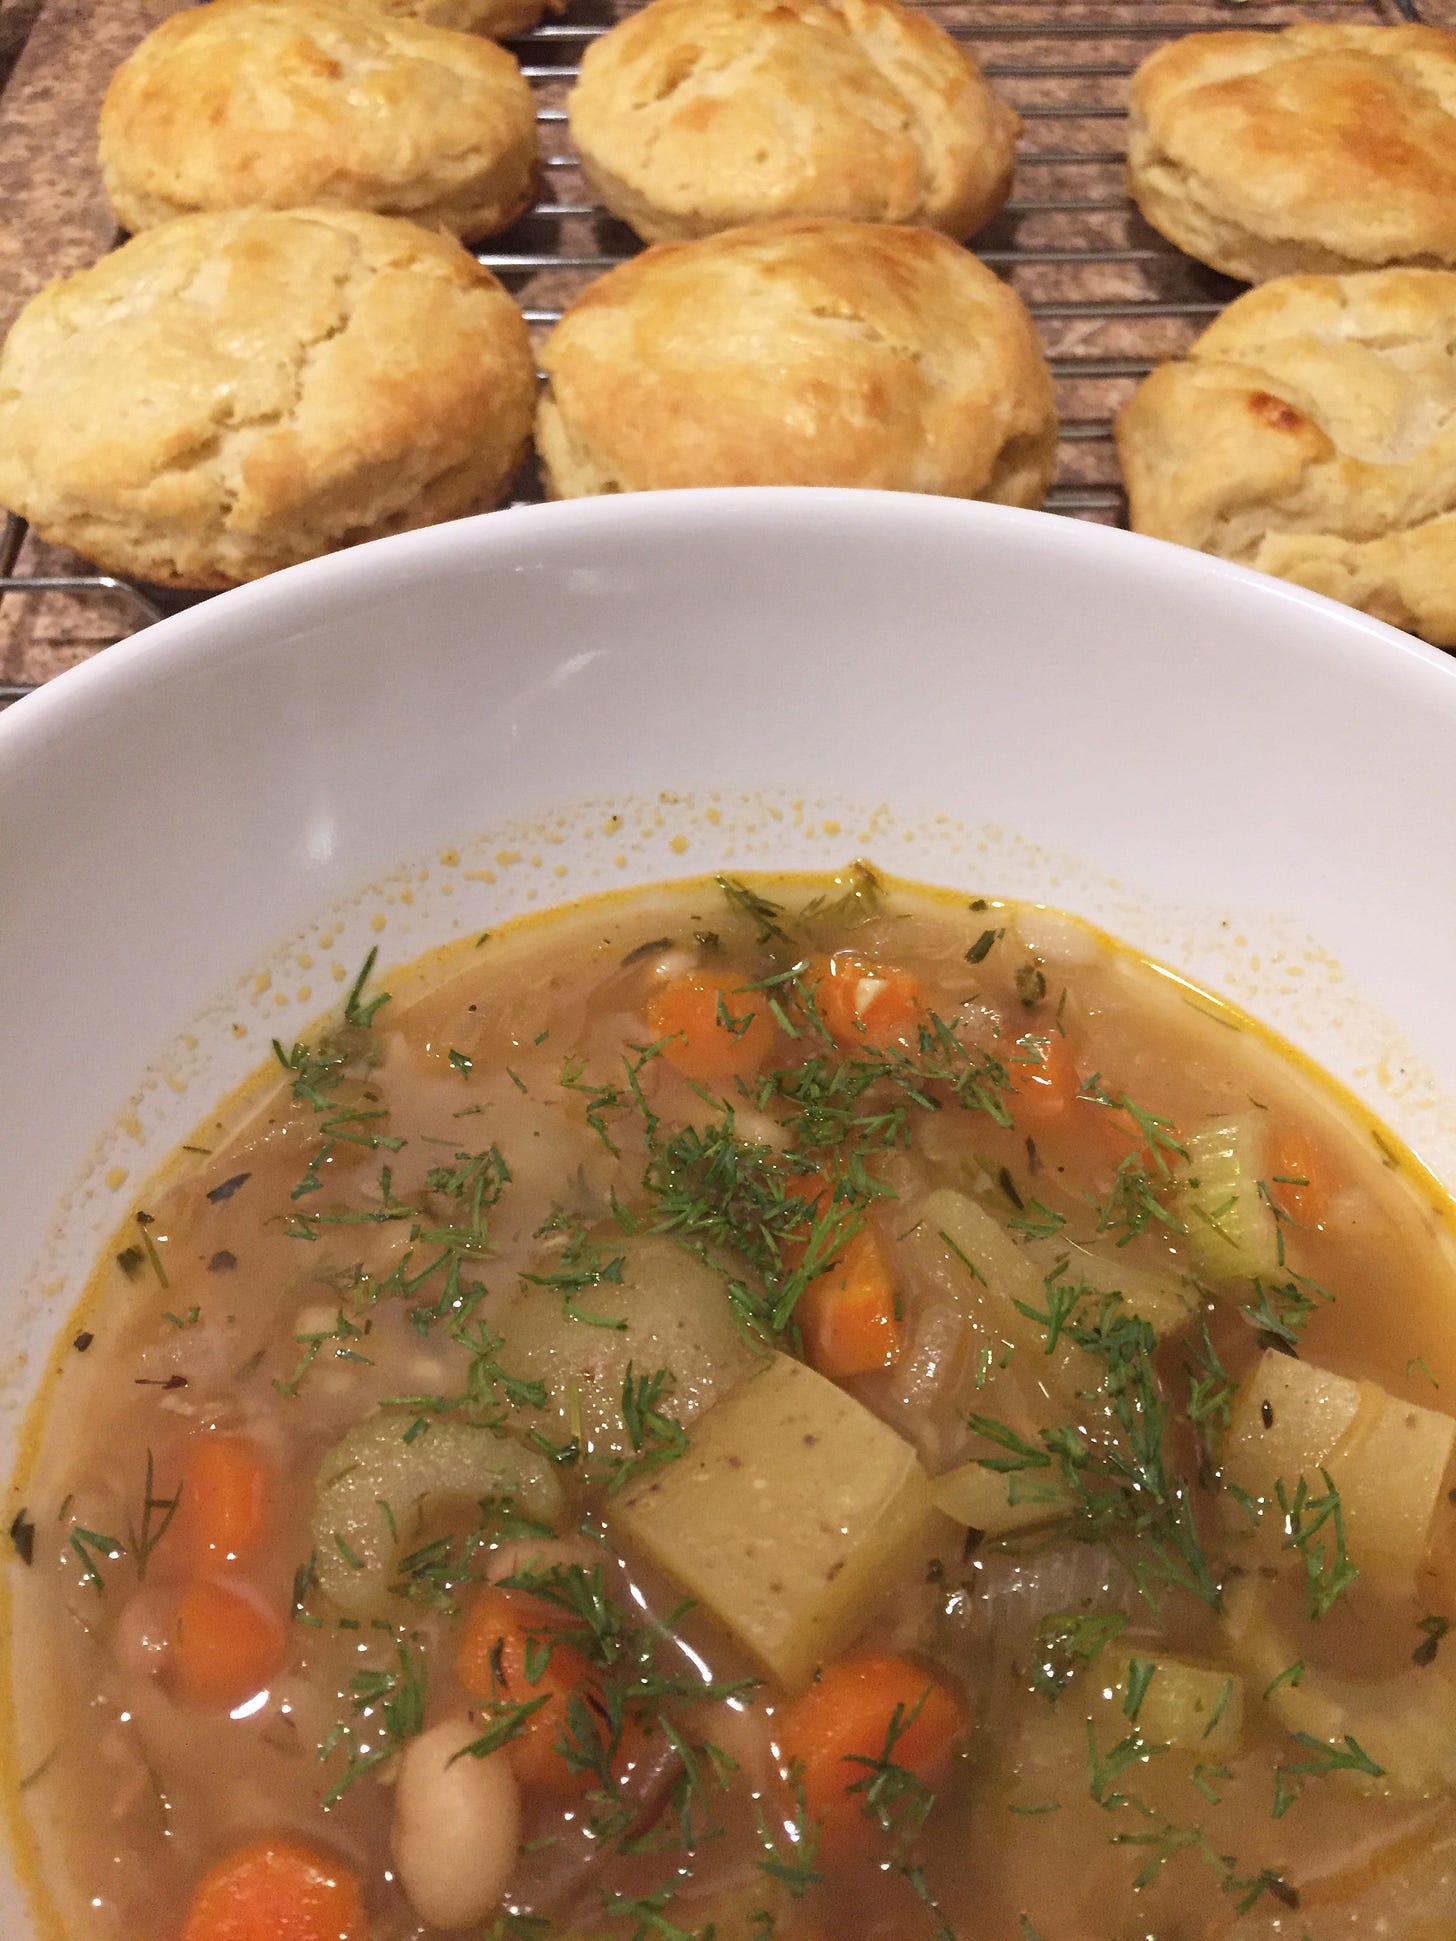 In the foreground, a white bowl of stew with carrots, beans, potatoes, and fresh dill. Behind it, a cooling rack with six browned buttermilk biscuits.